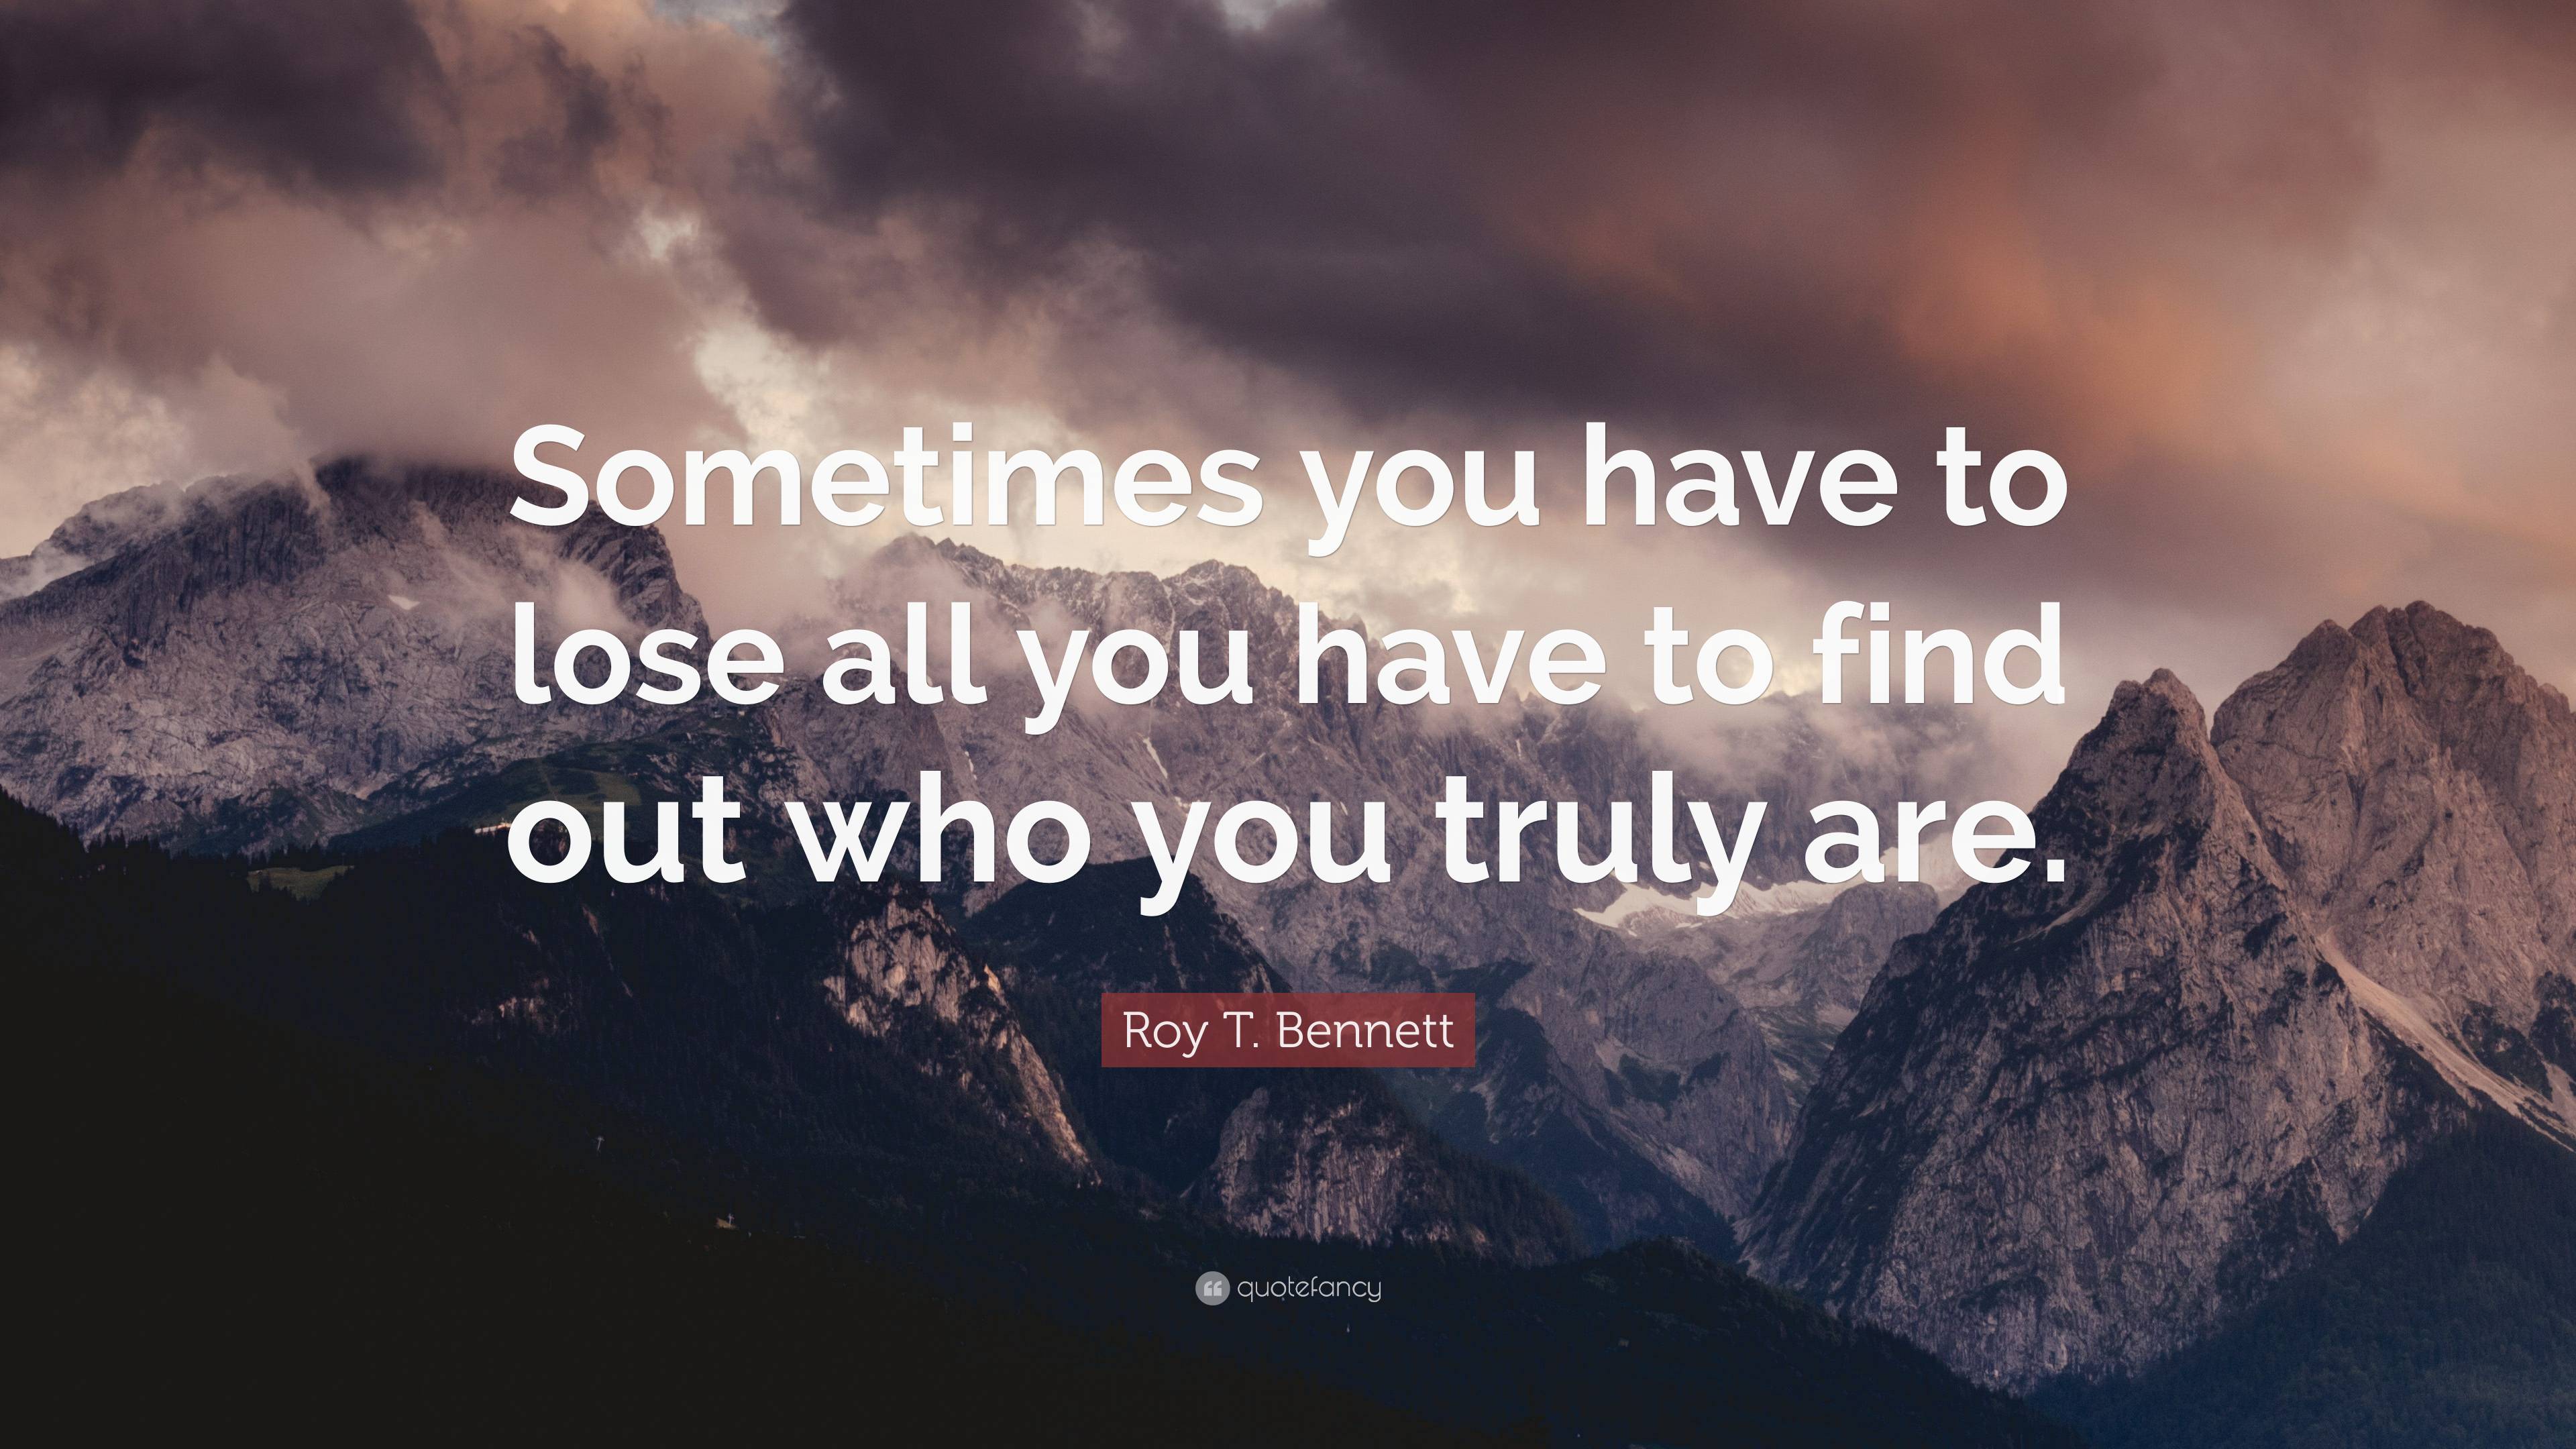 Roy T. Bennett Quote: “Sometimes you have to lose all you have to find ...